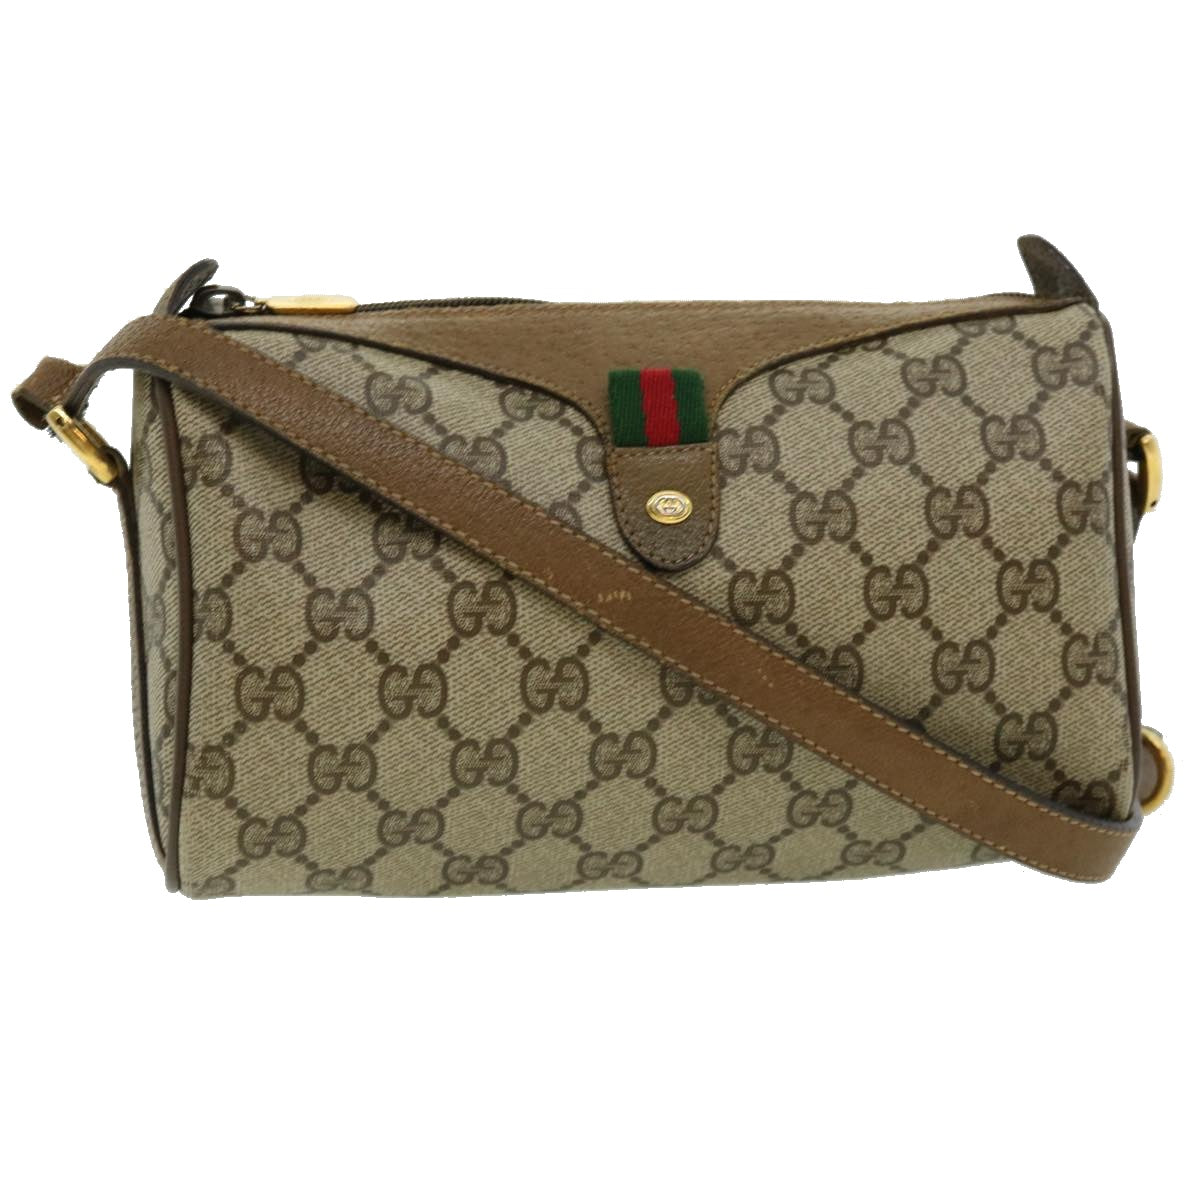 GUCCI GG Canvas Web Sherry Line Shoulder Bag Beige Red Green 8902018 Auth fm1530